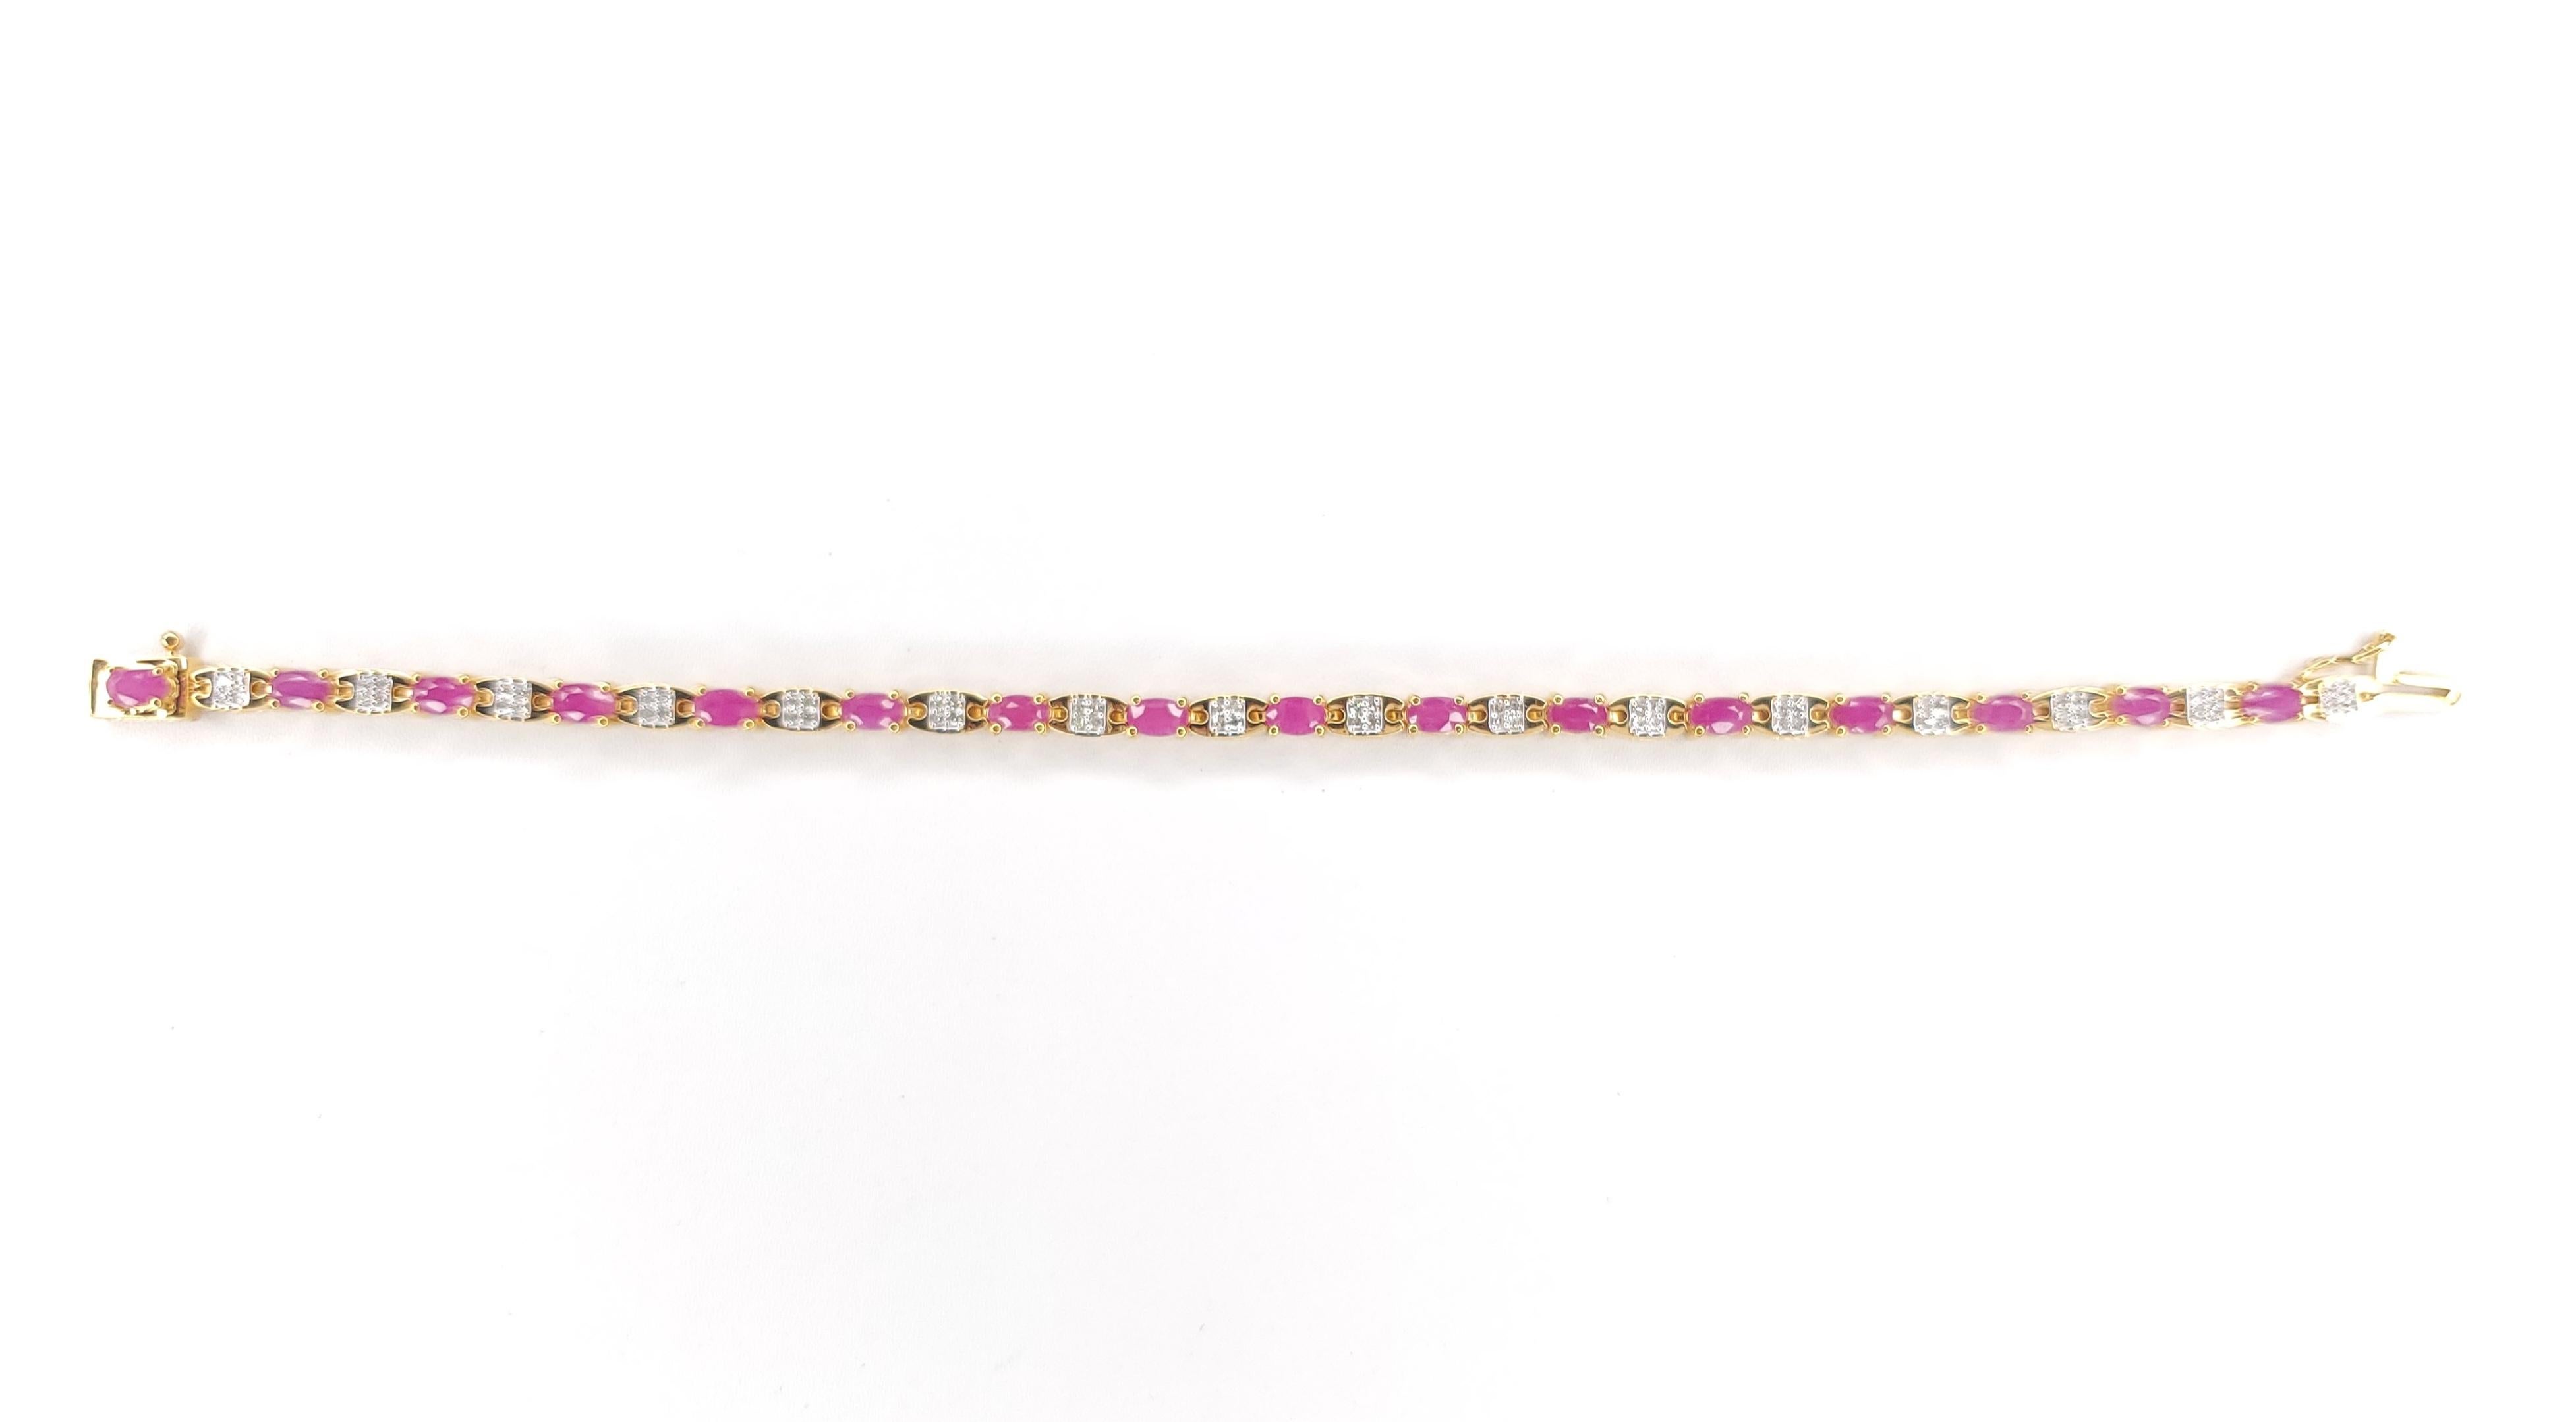 4.66cttw Johnson Ruby Sterling Silver Bracelet - Size 7

16 Johnson Ruby Oval - 4.32cttw
64 White Diamond - 0.34cttw

.925 Sterling Silver with 18k Yellow Gold Plated Finished 

US Bracelet Size : 7
MSRP : $1,218.00
